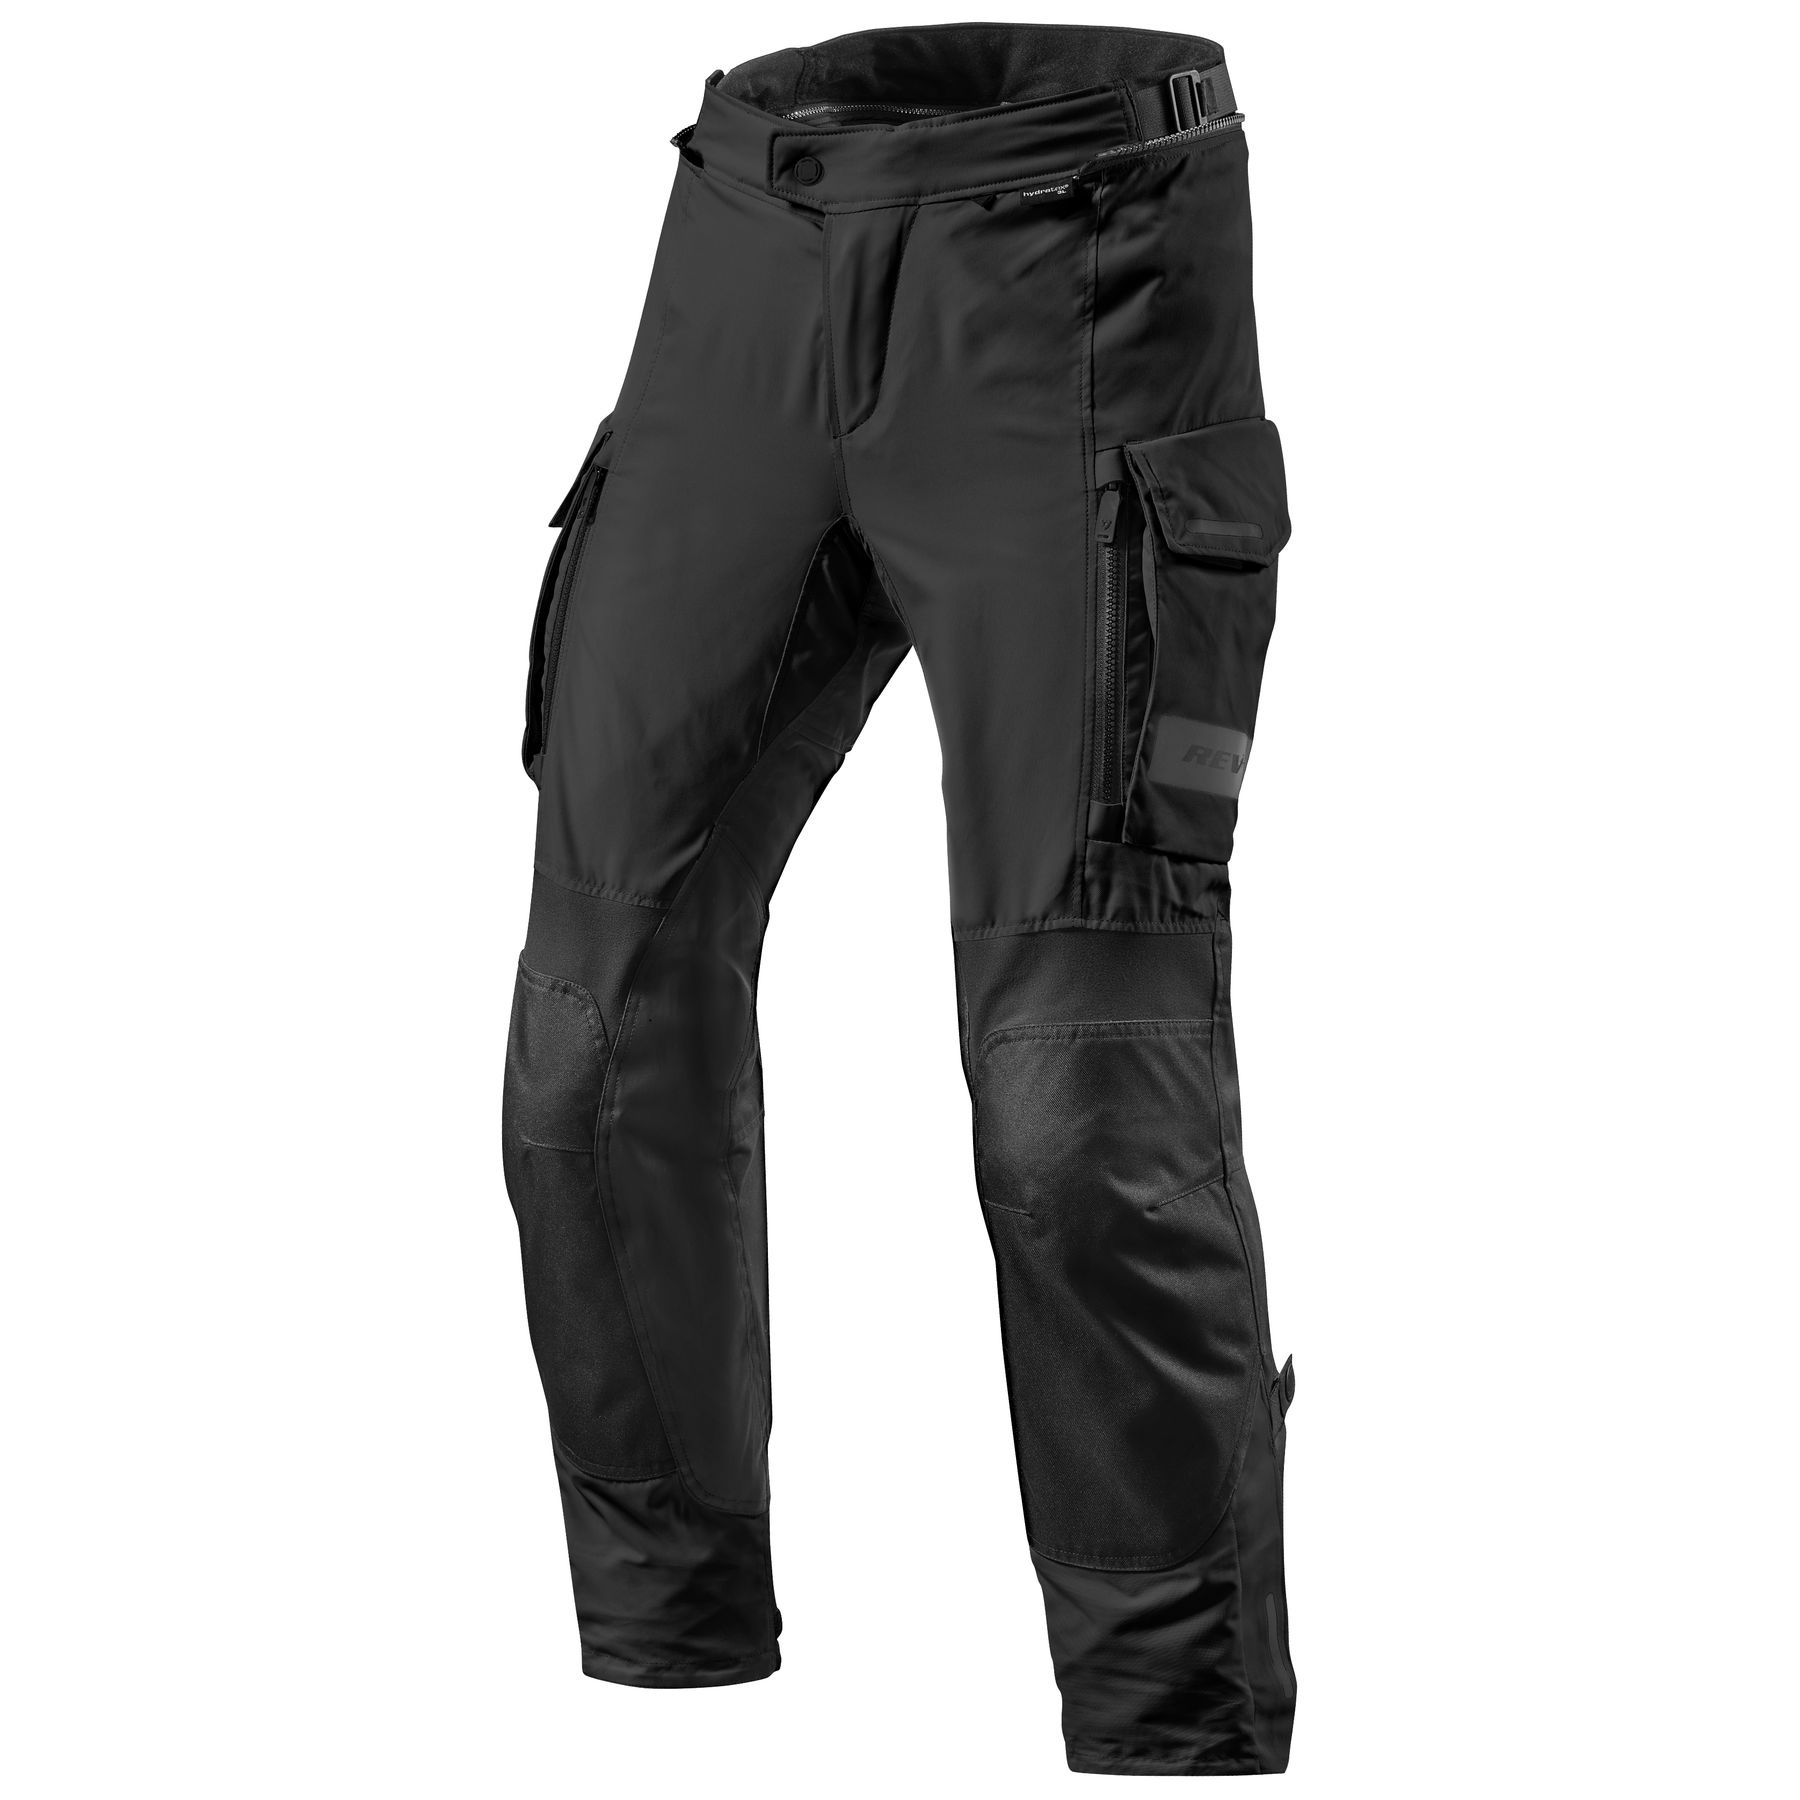 Mens Summer Riding Motorcycle Pants Breathable Jeans Cycling Slim CE Trousers